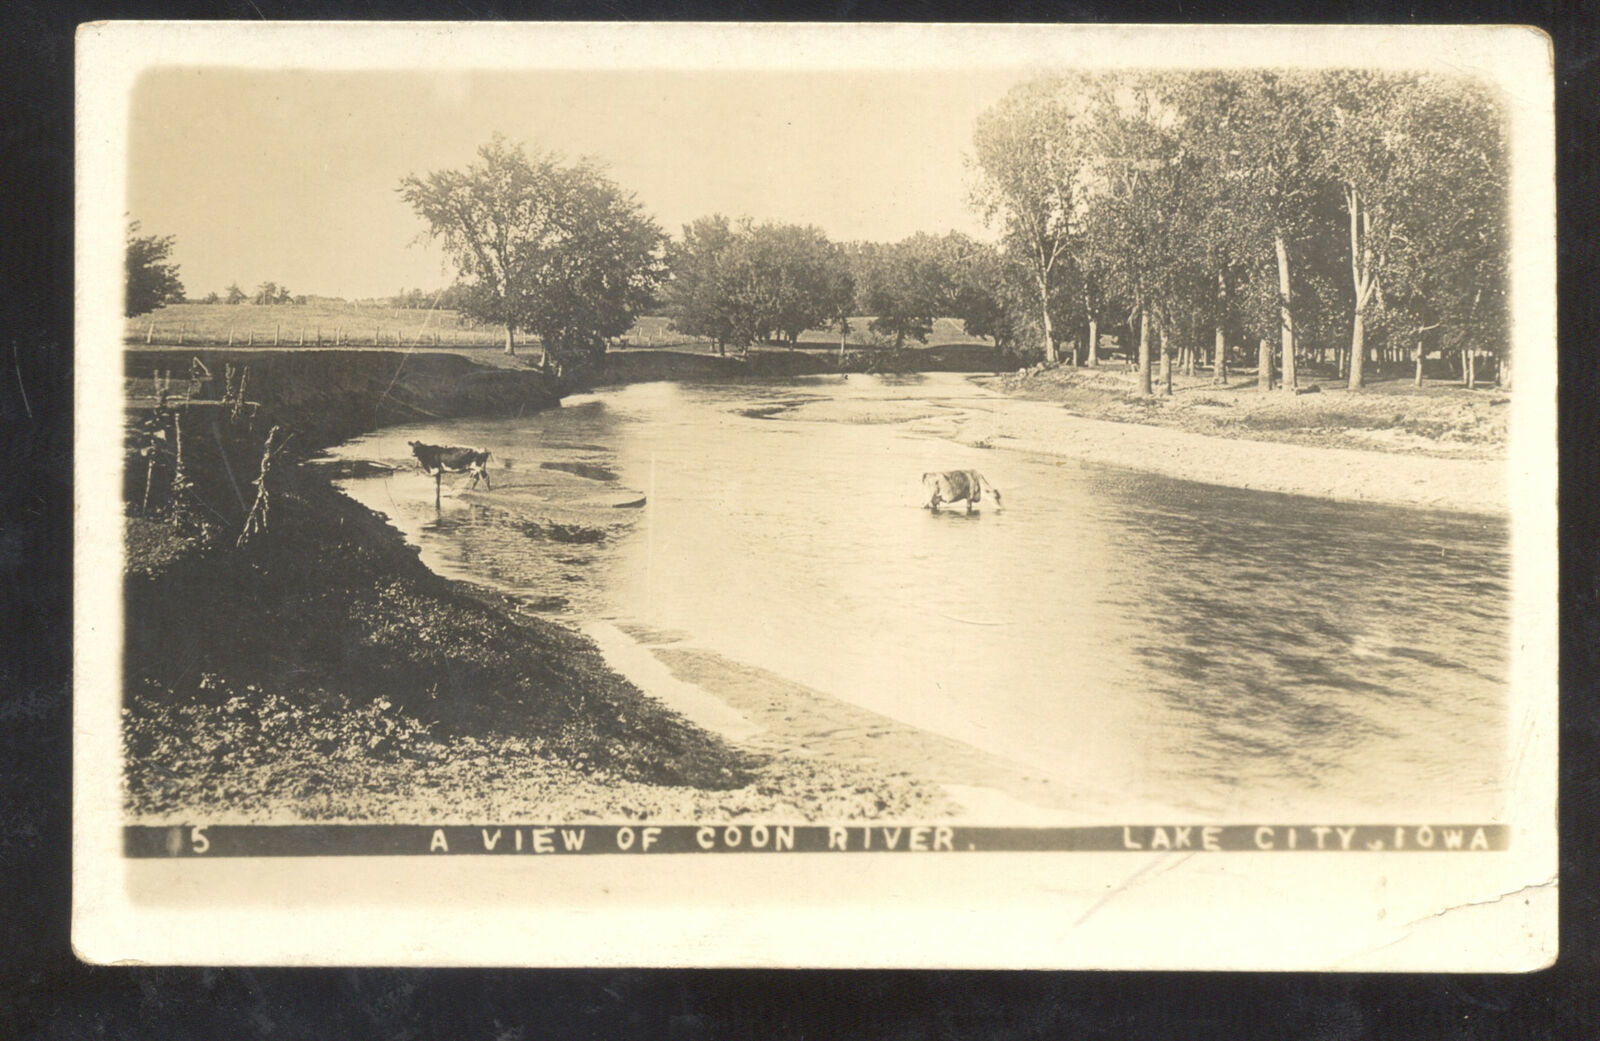 RPPC LAKE CITY IOWA COON RIVER VIEW VINTAGE REAL PHOTO PSOTCARD 1912 CRABTREE